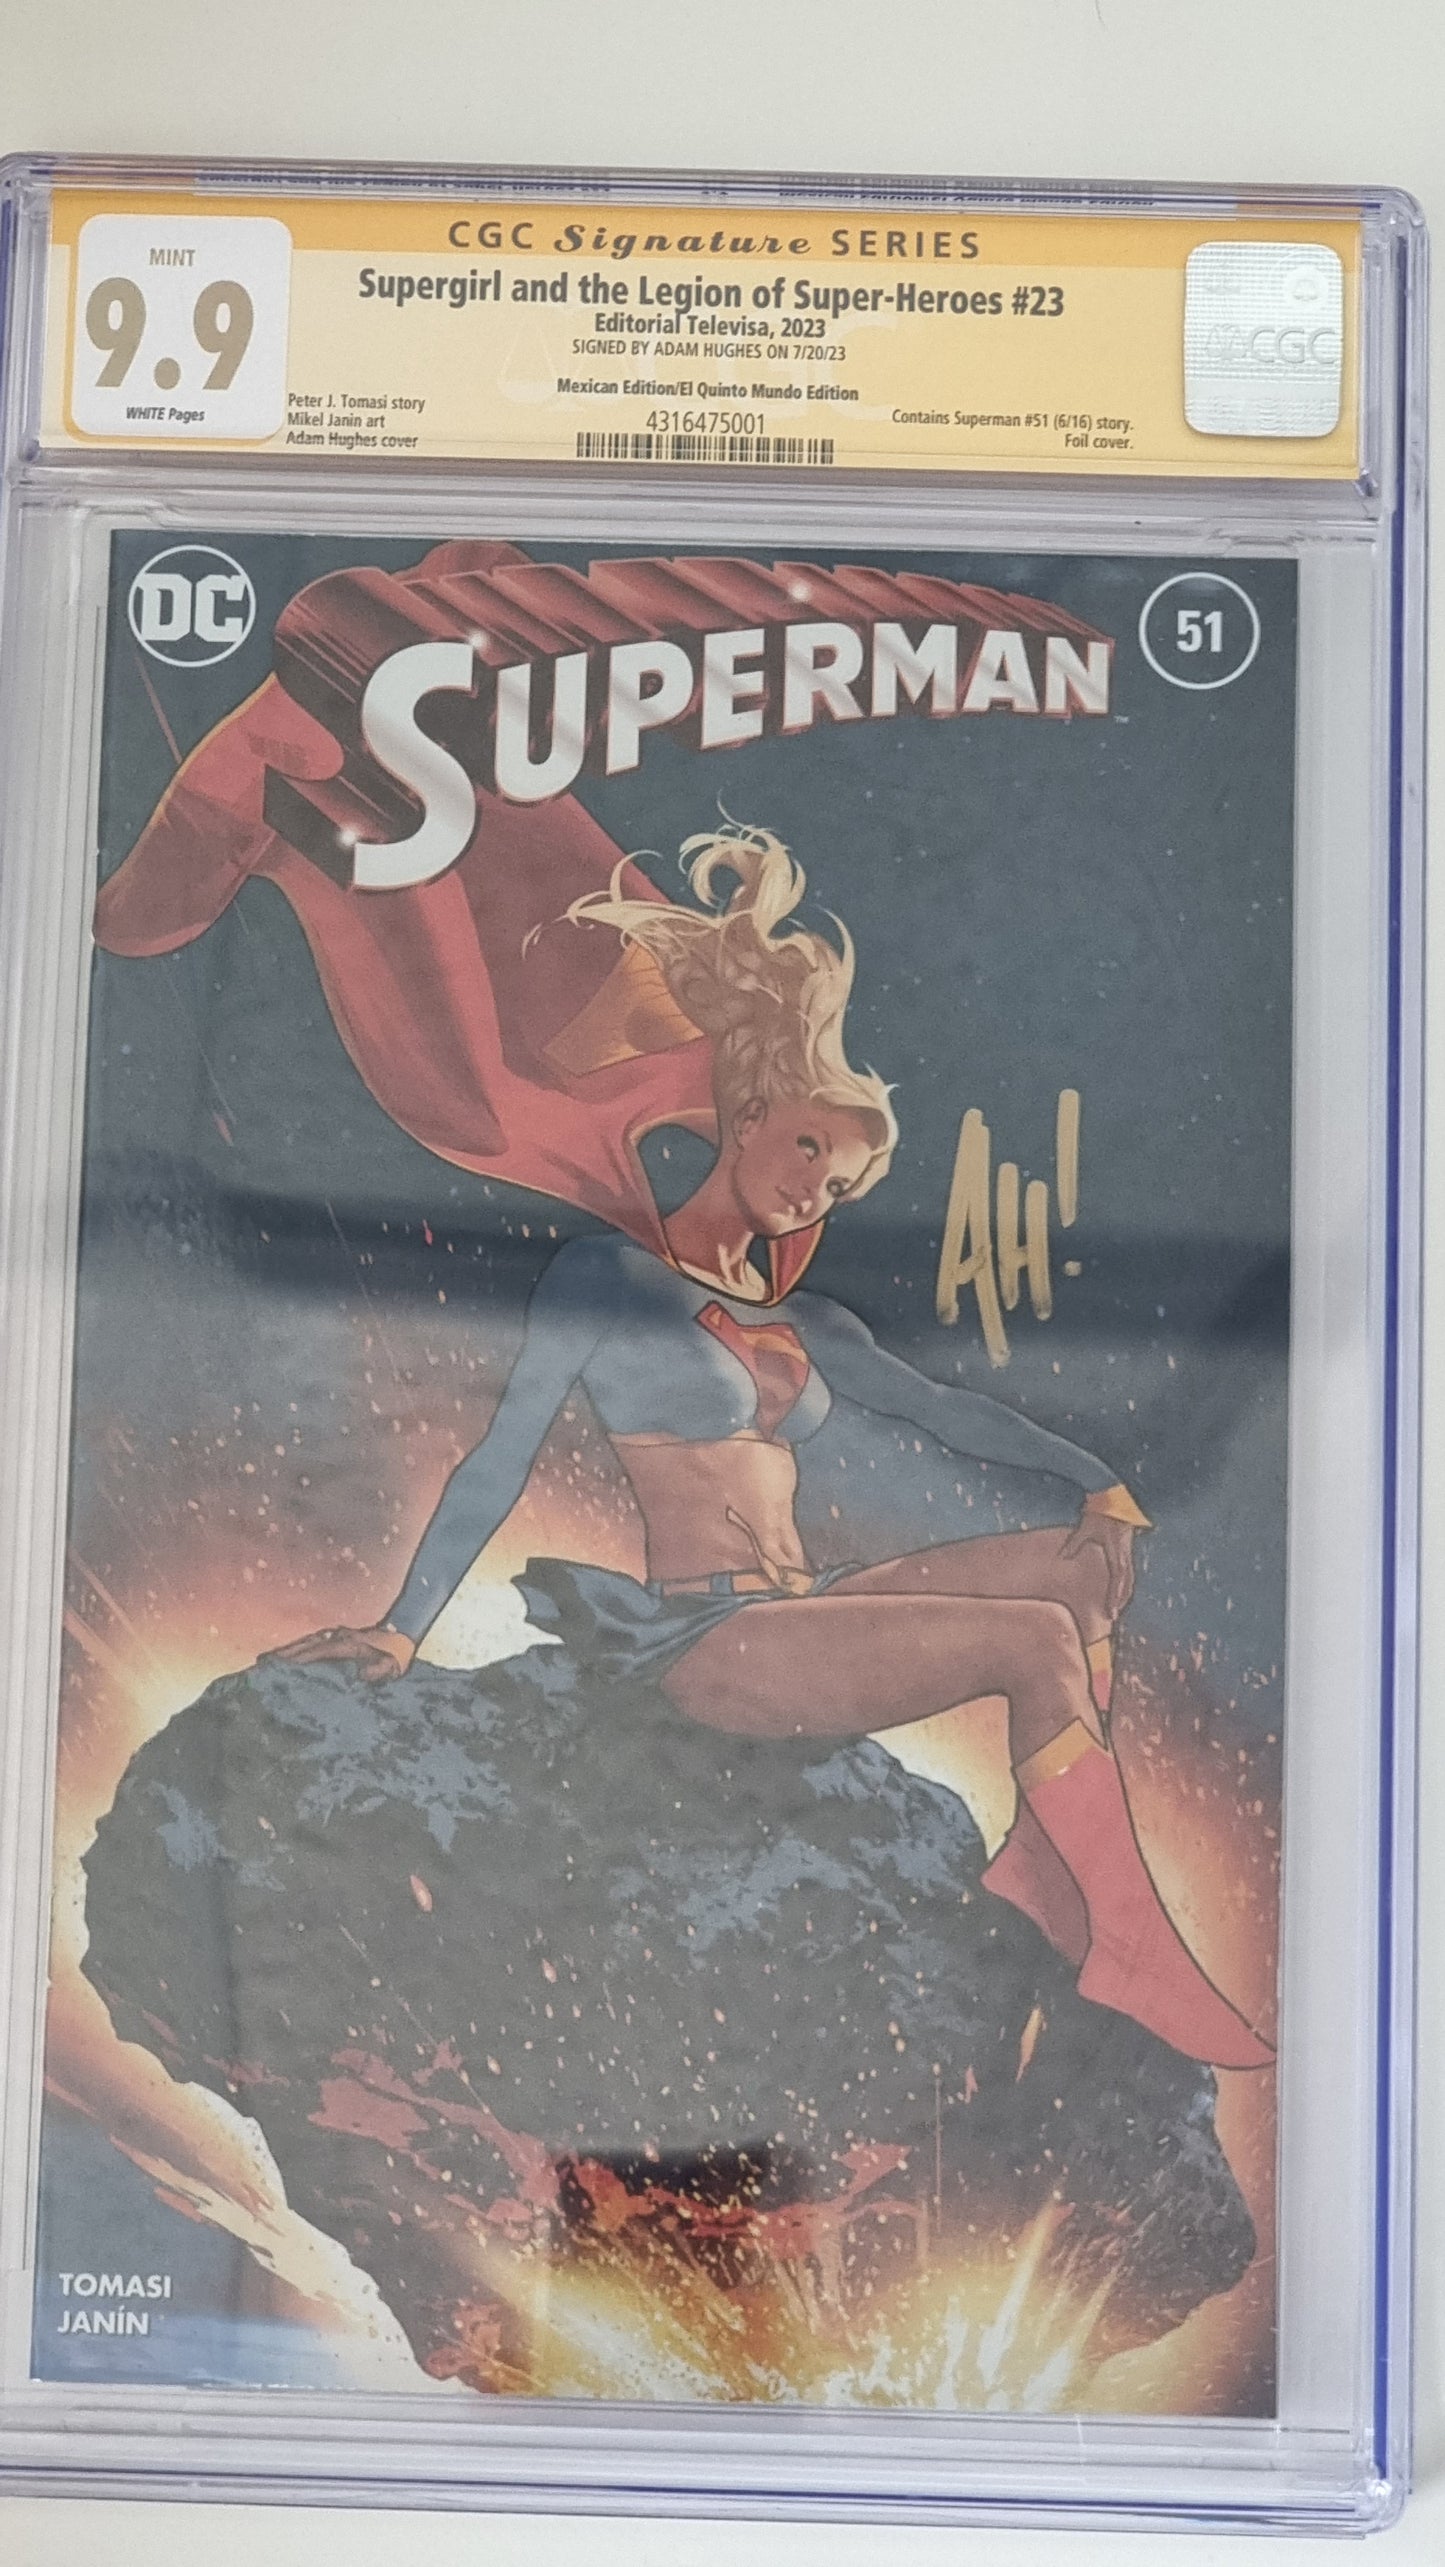 SUPERMAN #51 LOSH ADAM HUGHES MEXICAN FOIL SDCC VARIANT LIMITED TO 1000 COPIES CGC SS 9.9 SIGNED BY ADAM HUGHES